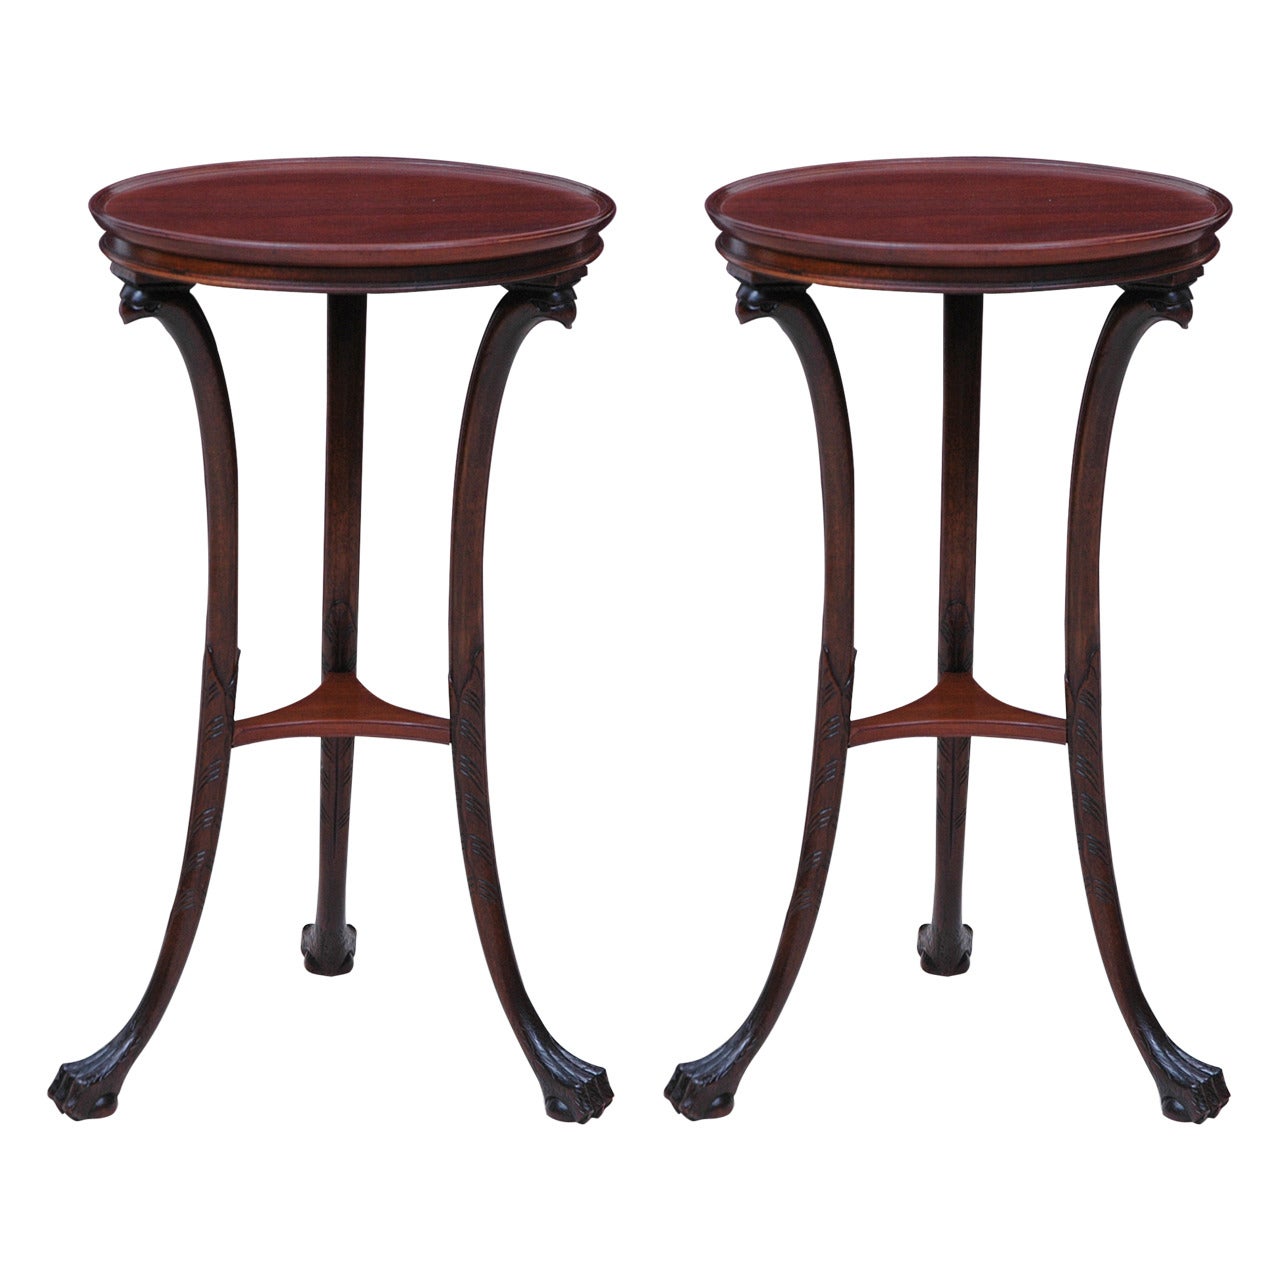 Pair of Round Tripod Tables in Mahogany